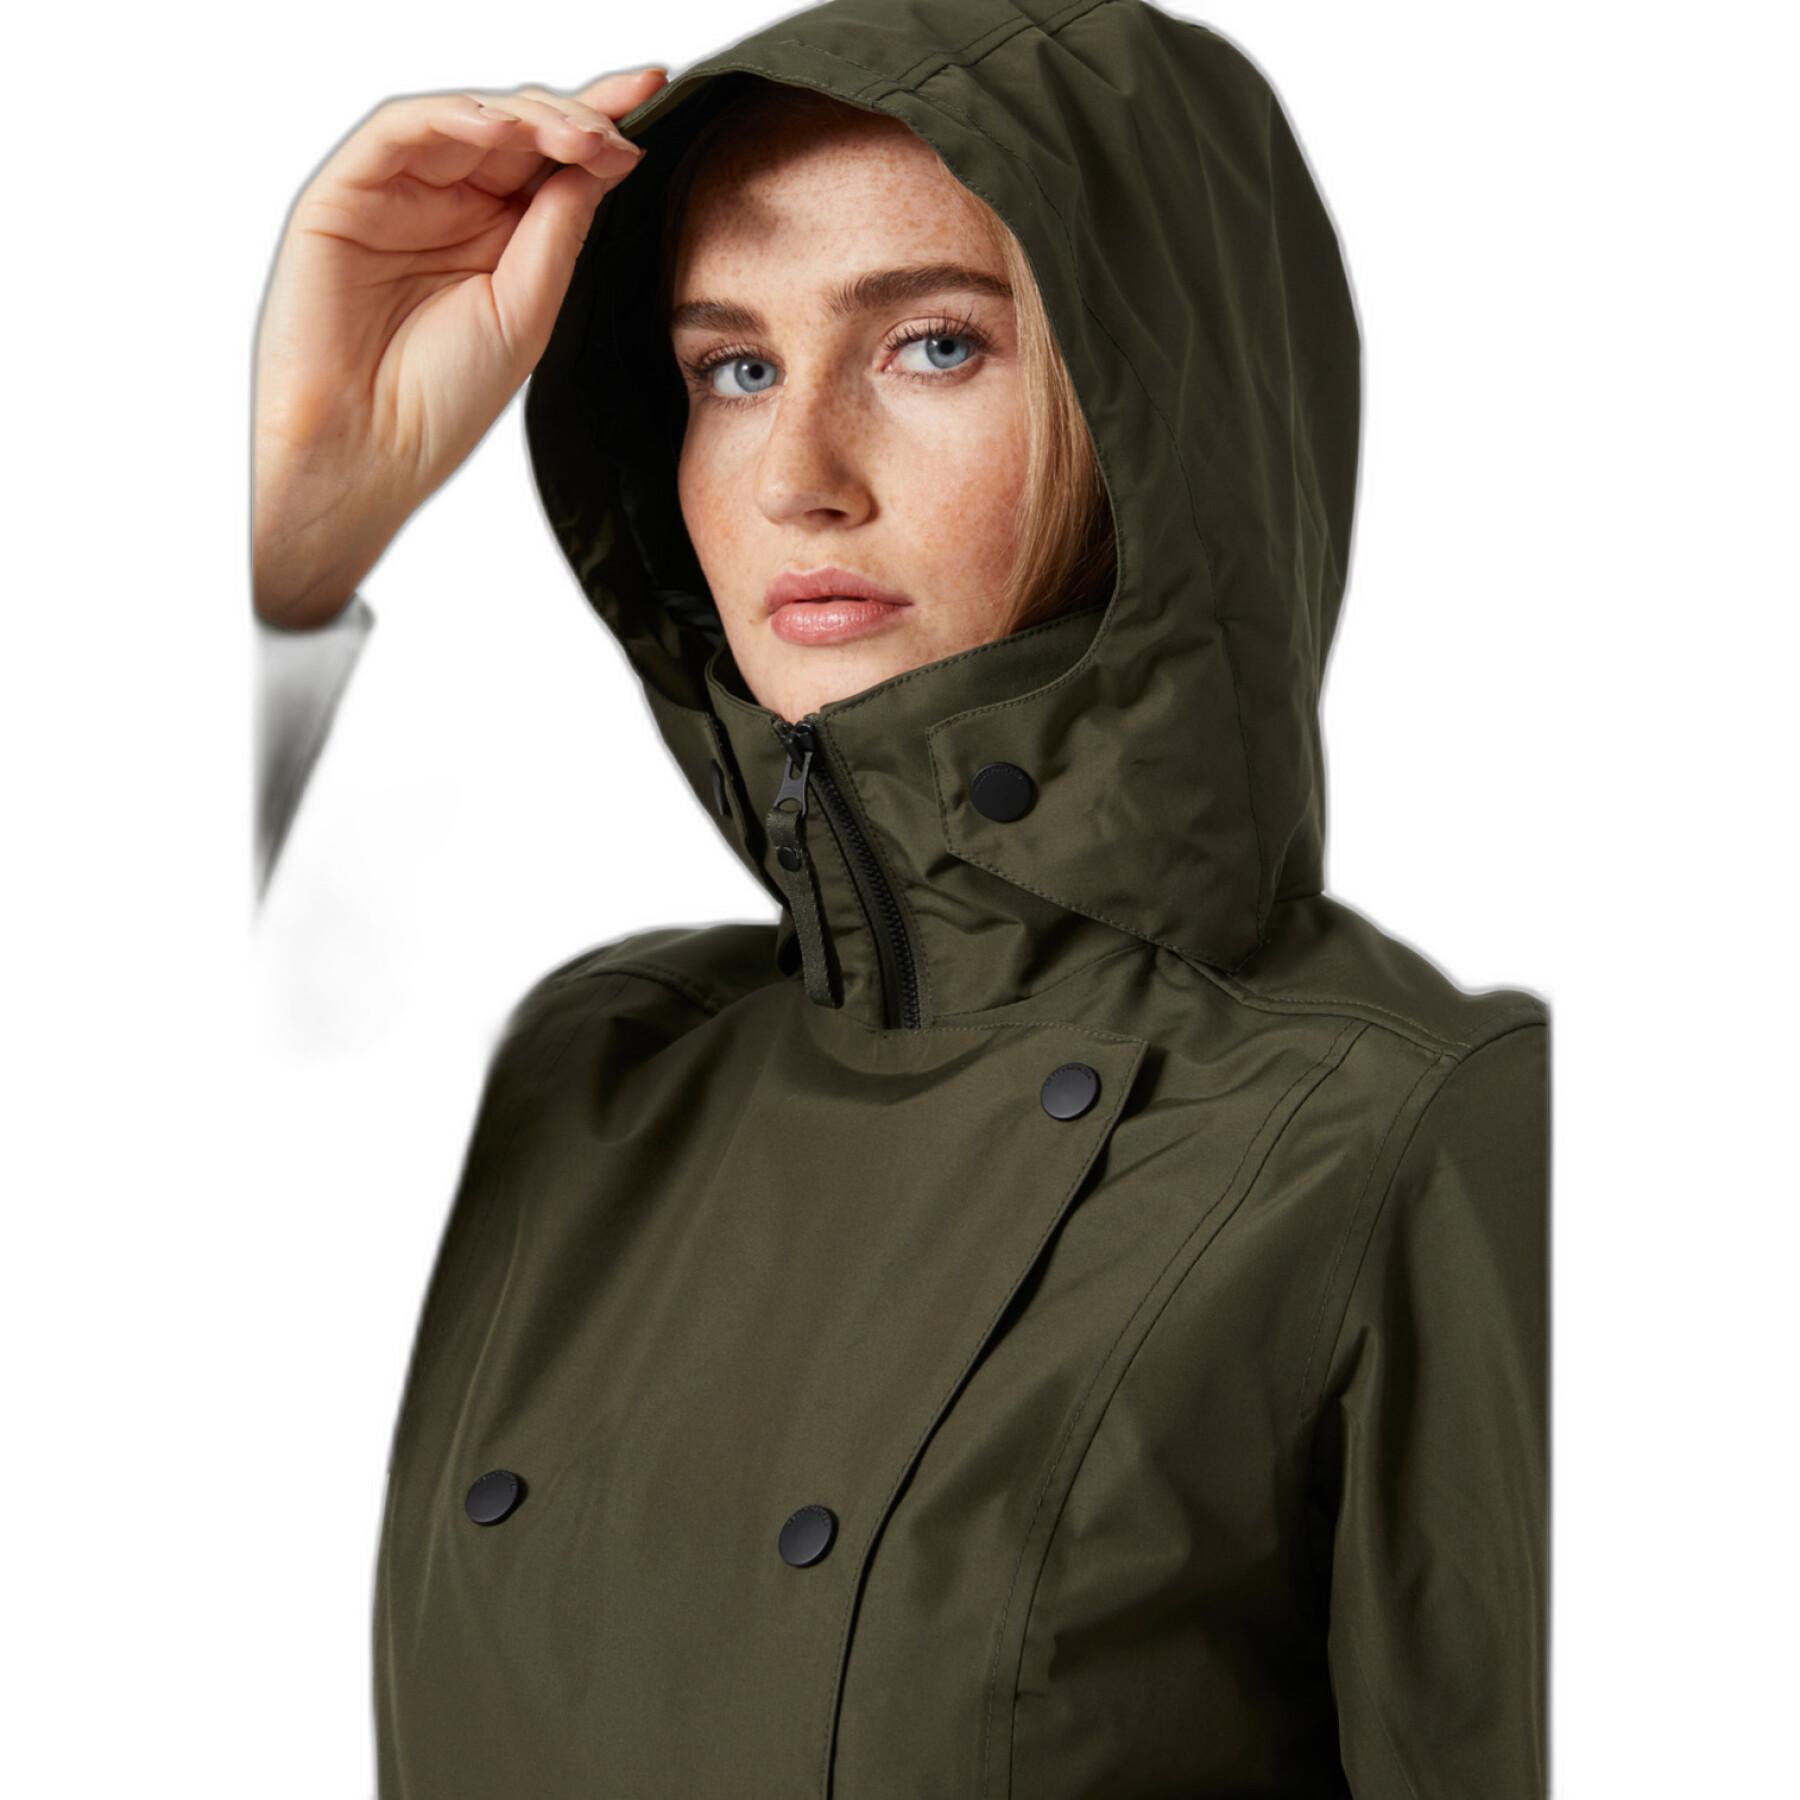 Giacca impermeabile da donna Helly Hansen welsey II trench